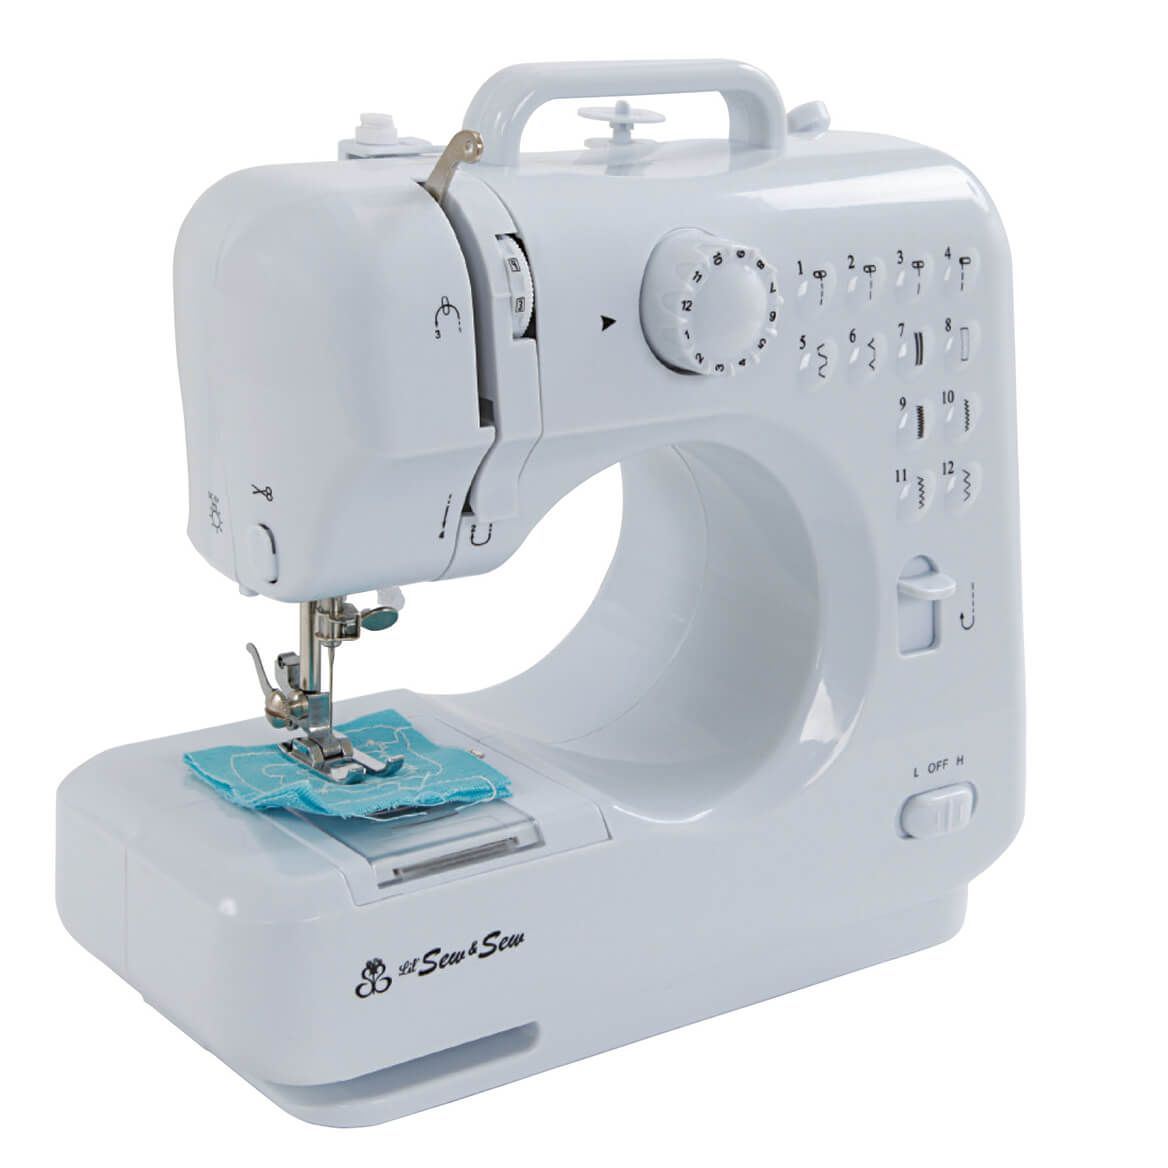 12 Stitch Table Top Sewing Machine + '-' + 369794